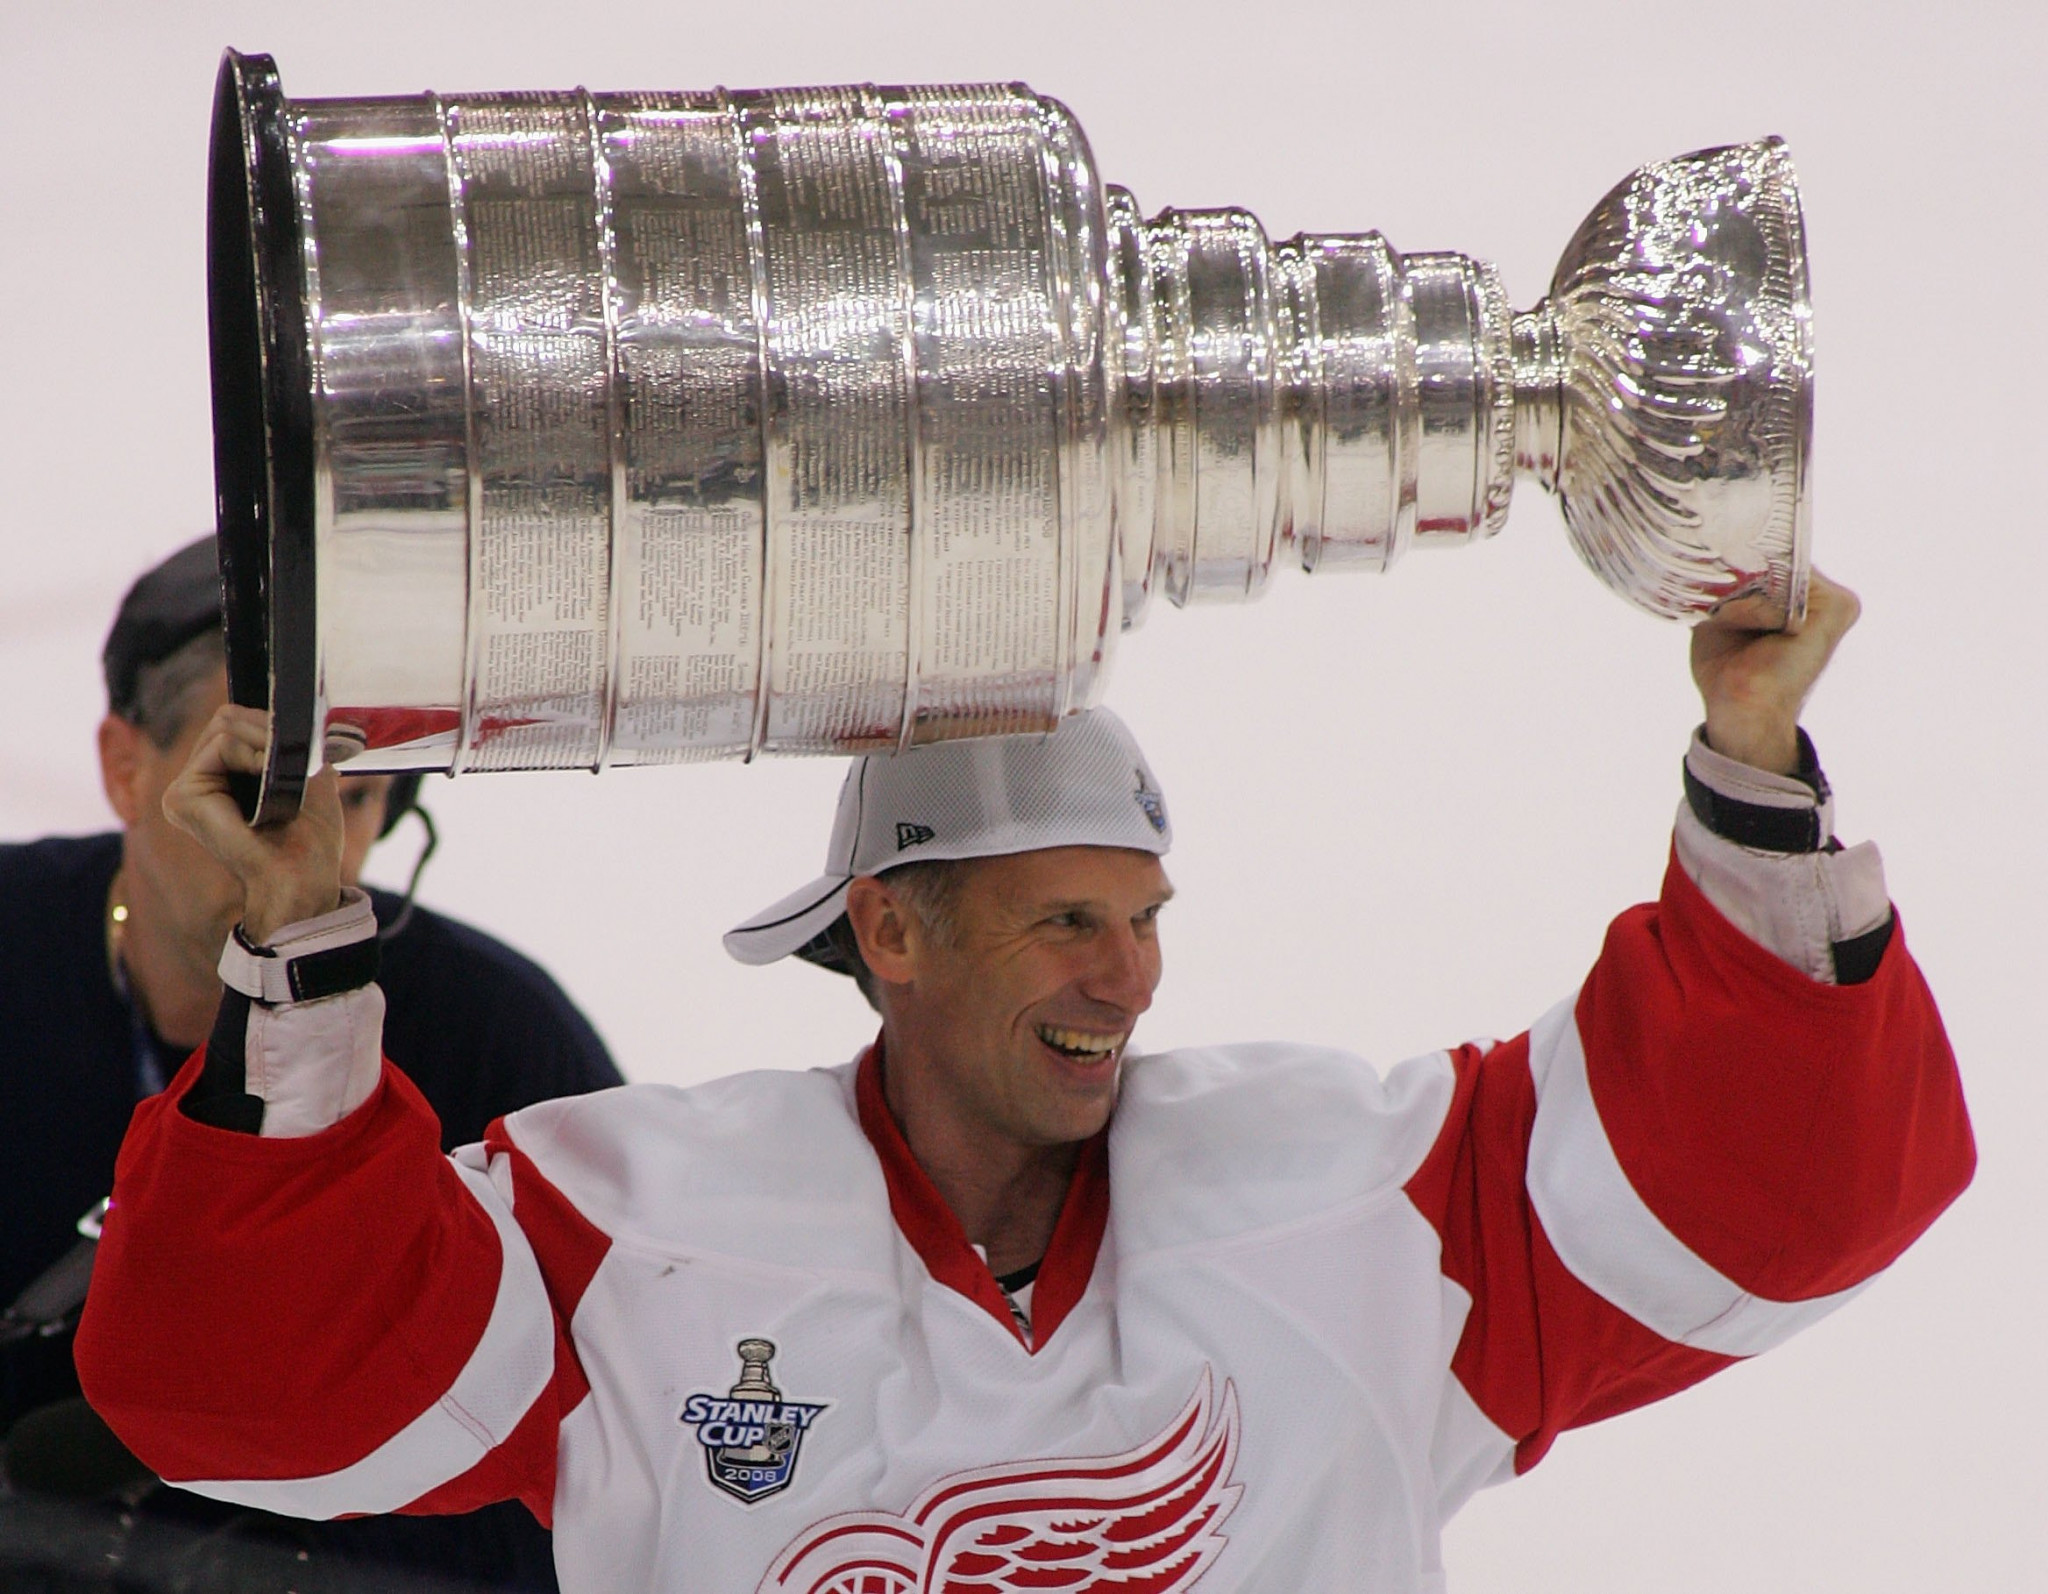 Dominik Hasek won the Stanley Cup with the Detroit Red Wings in 2008 ©Getty Images